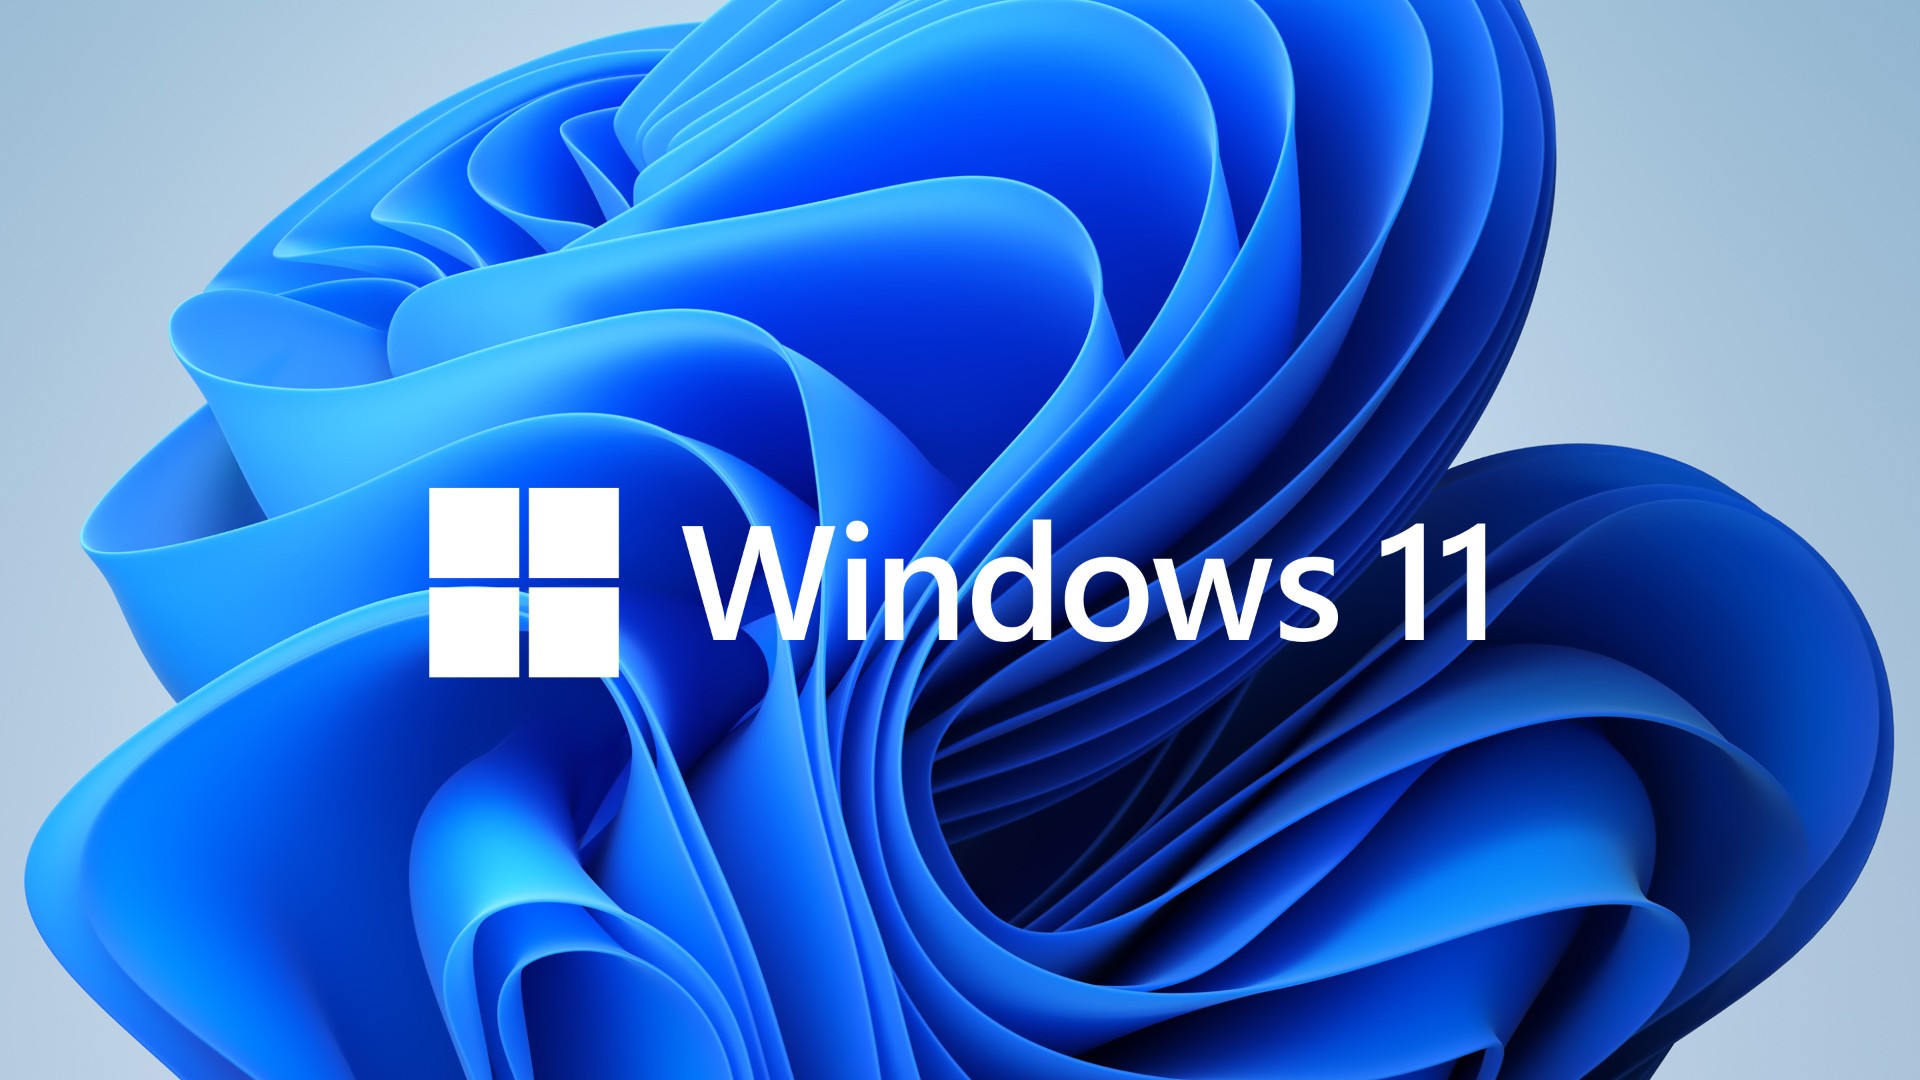 Microsoft releases windows 11 preview build 22499